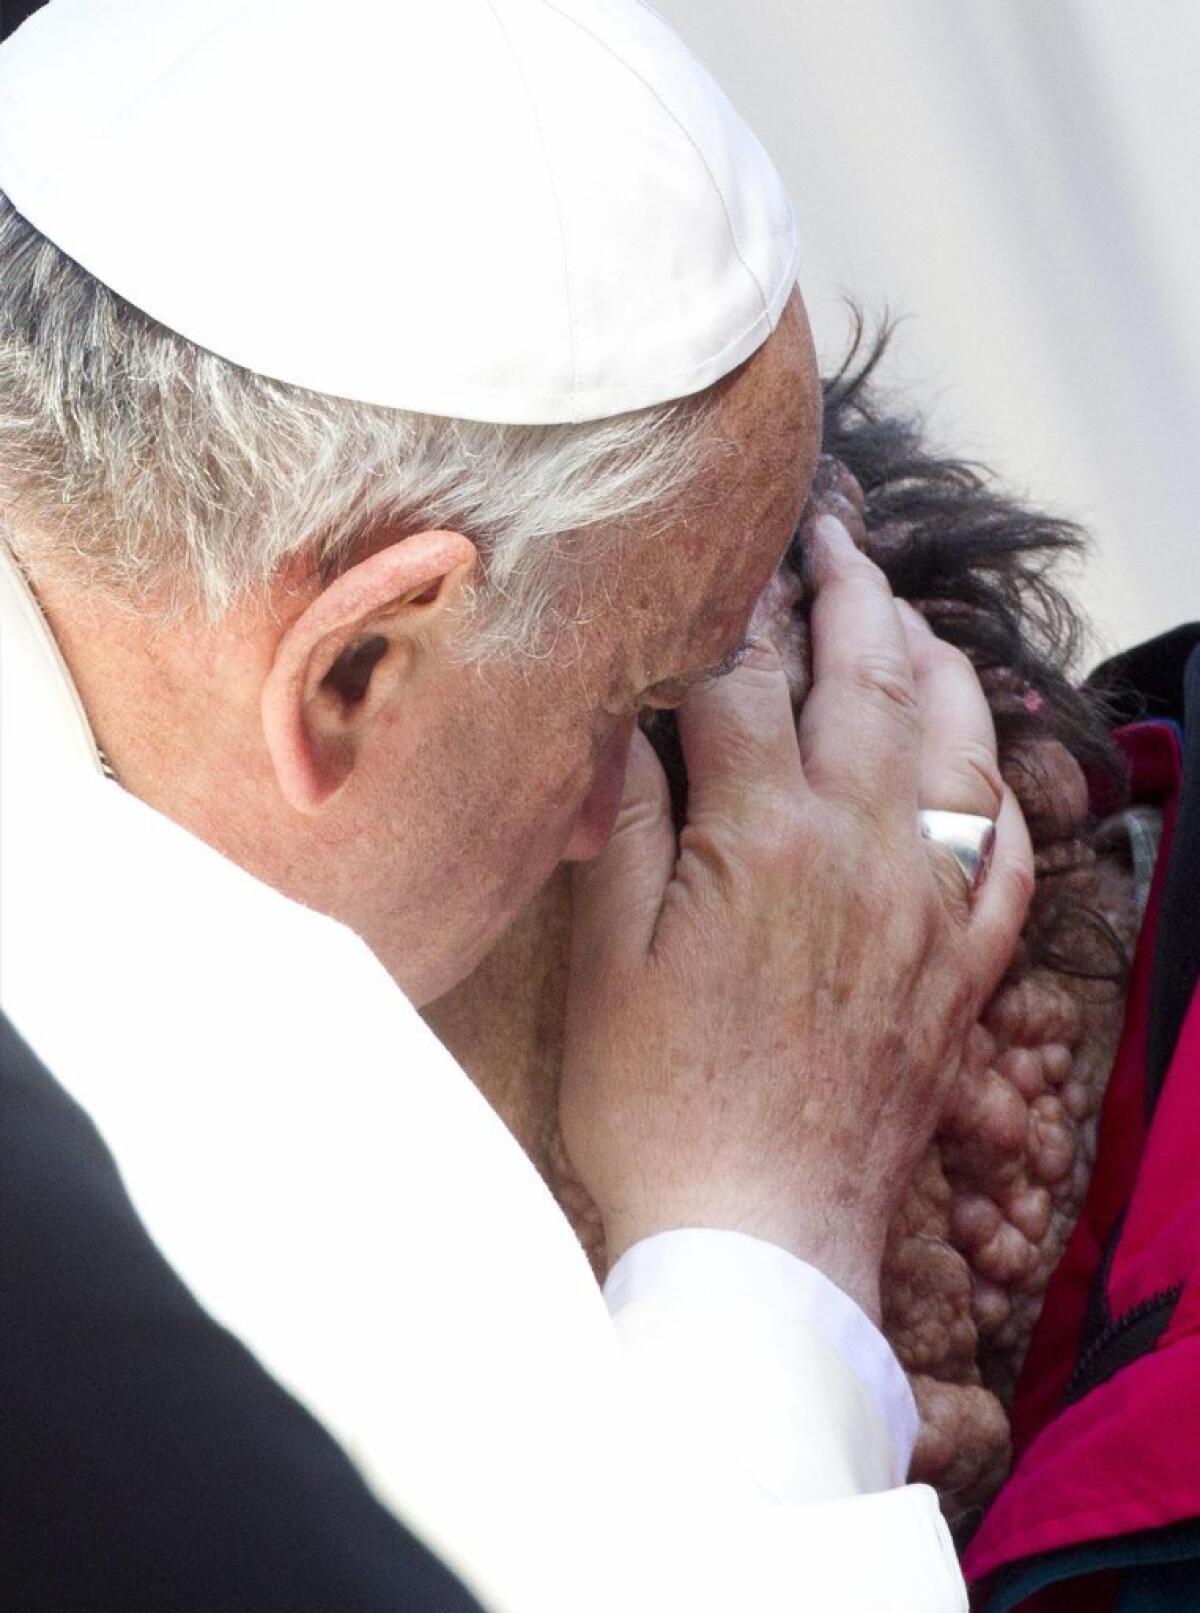 Pope Francis embraces a man believed to have neurofibromatosis.